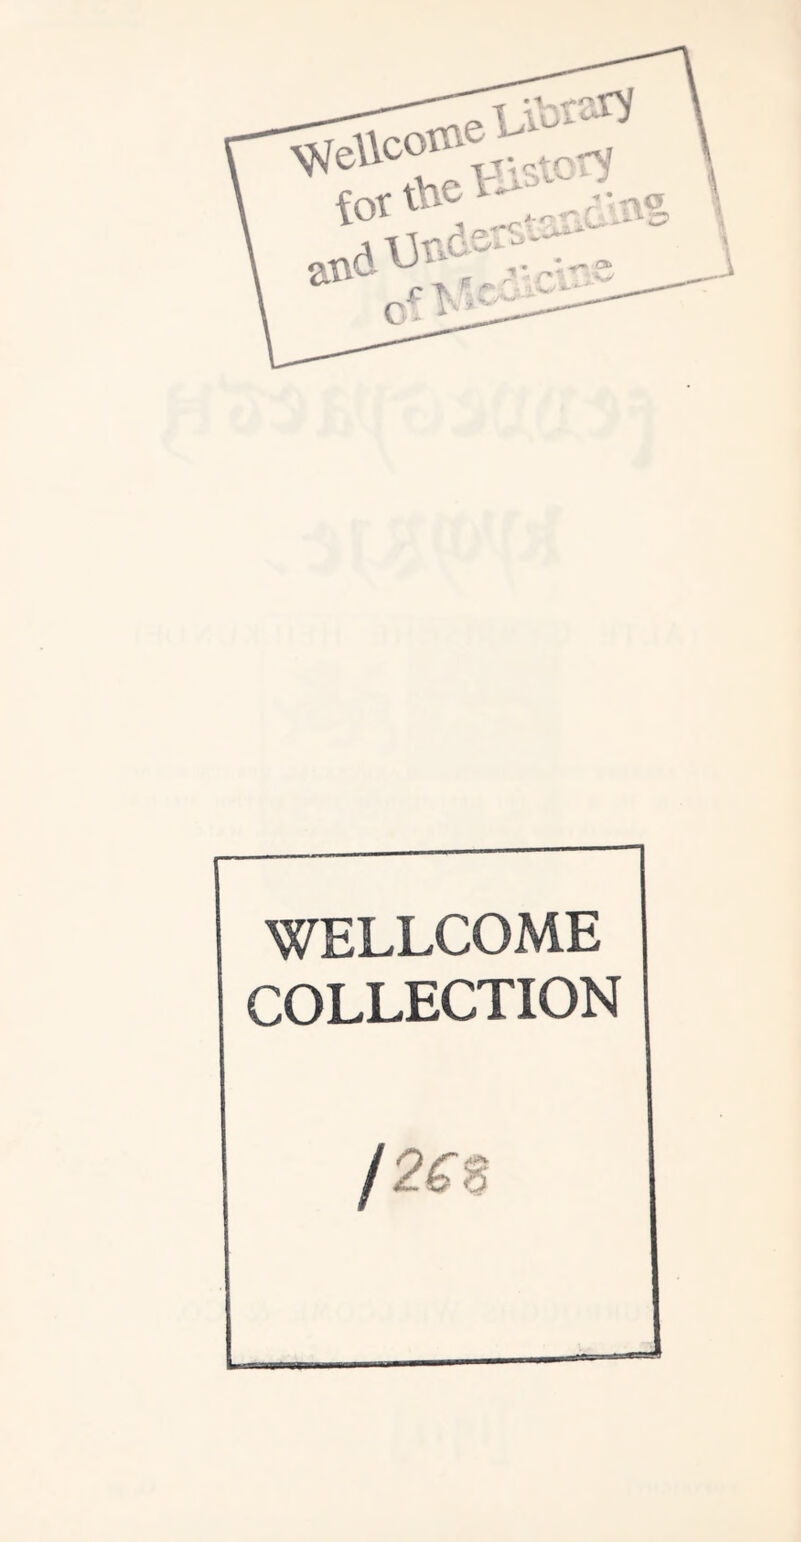 WELLCOME COLLECTION